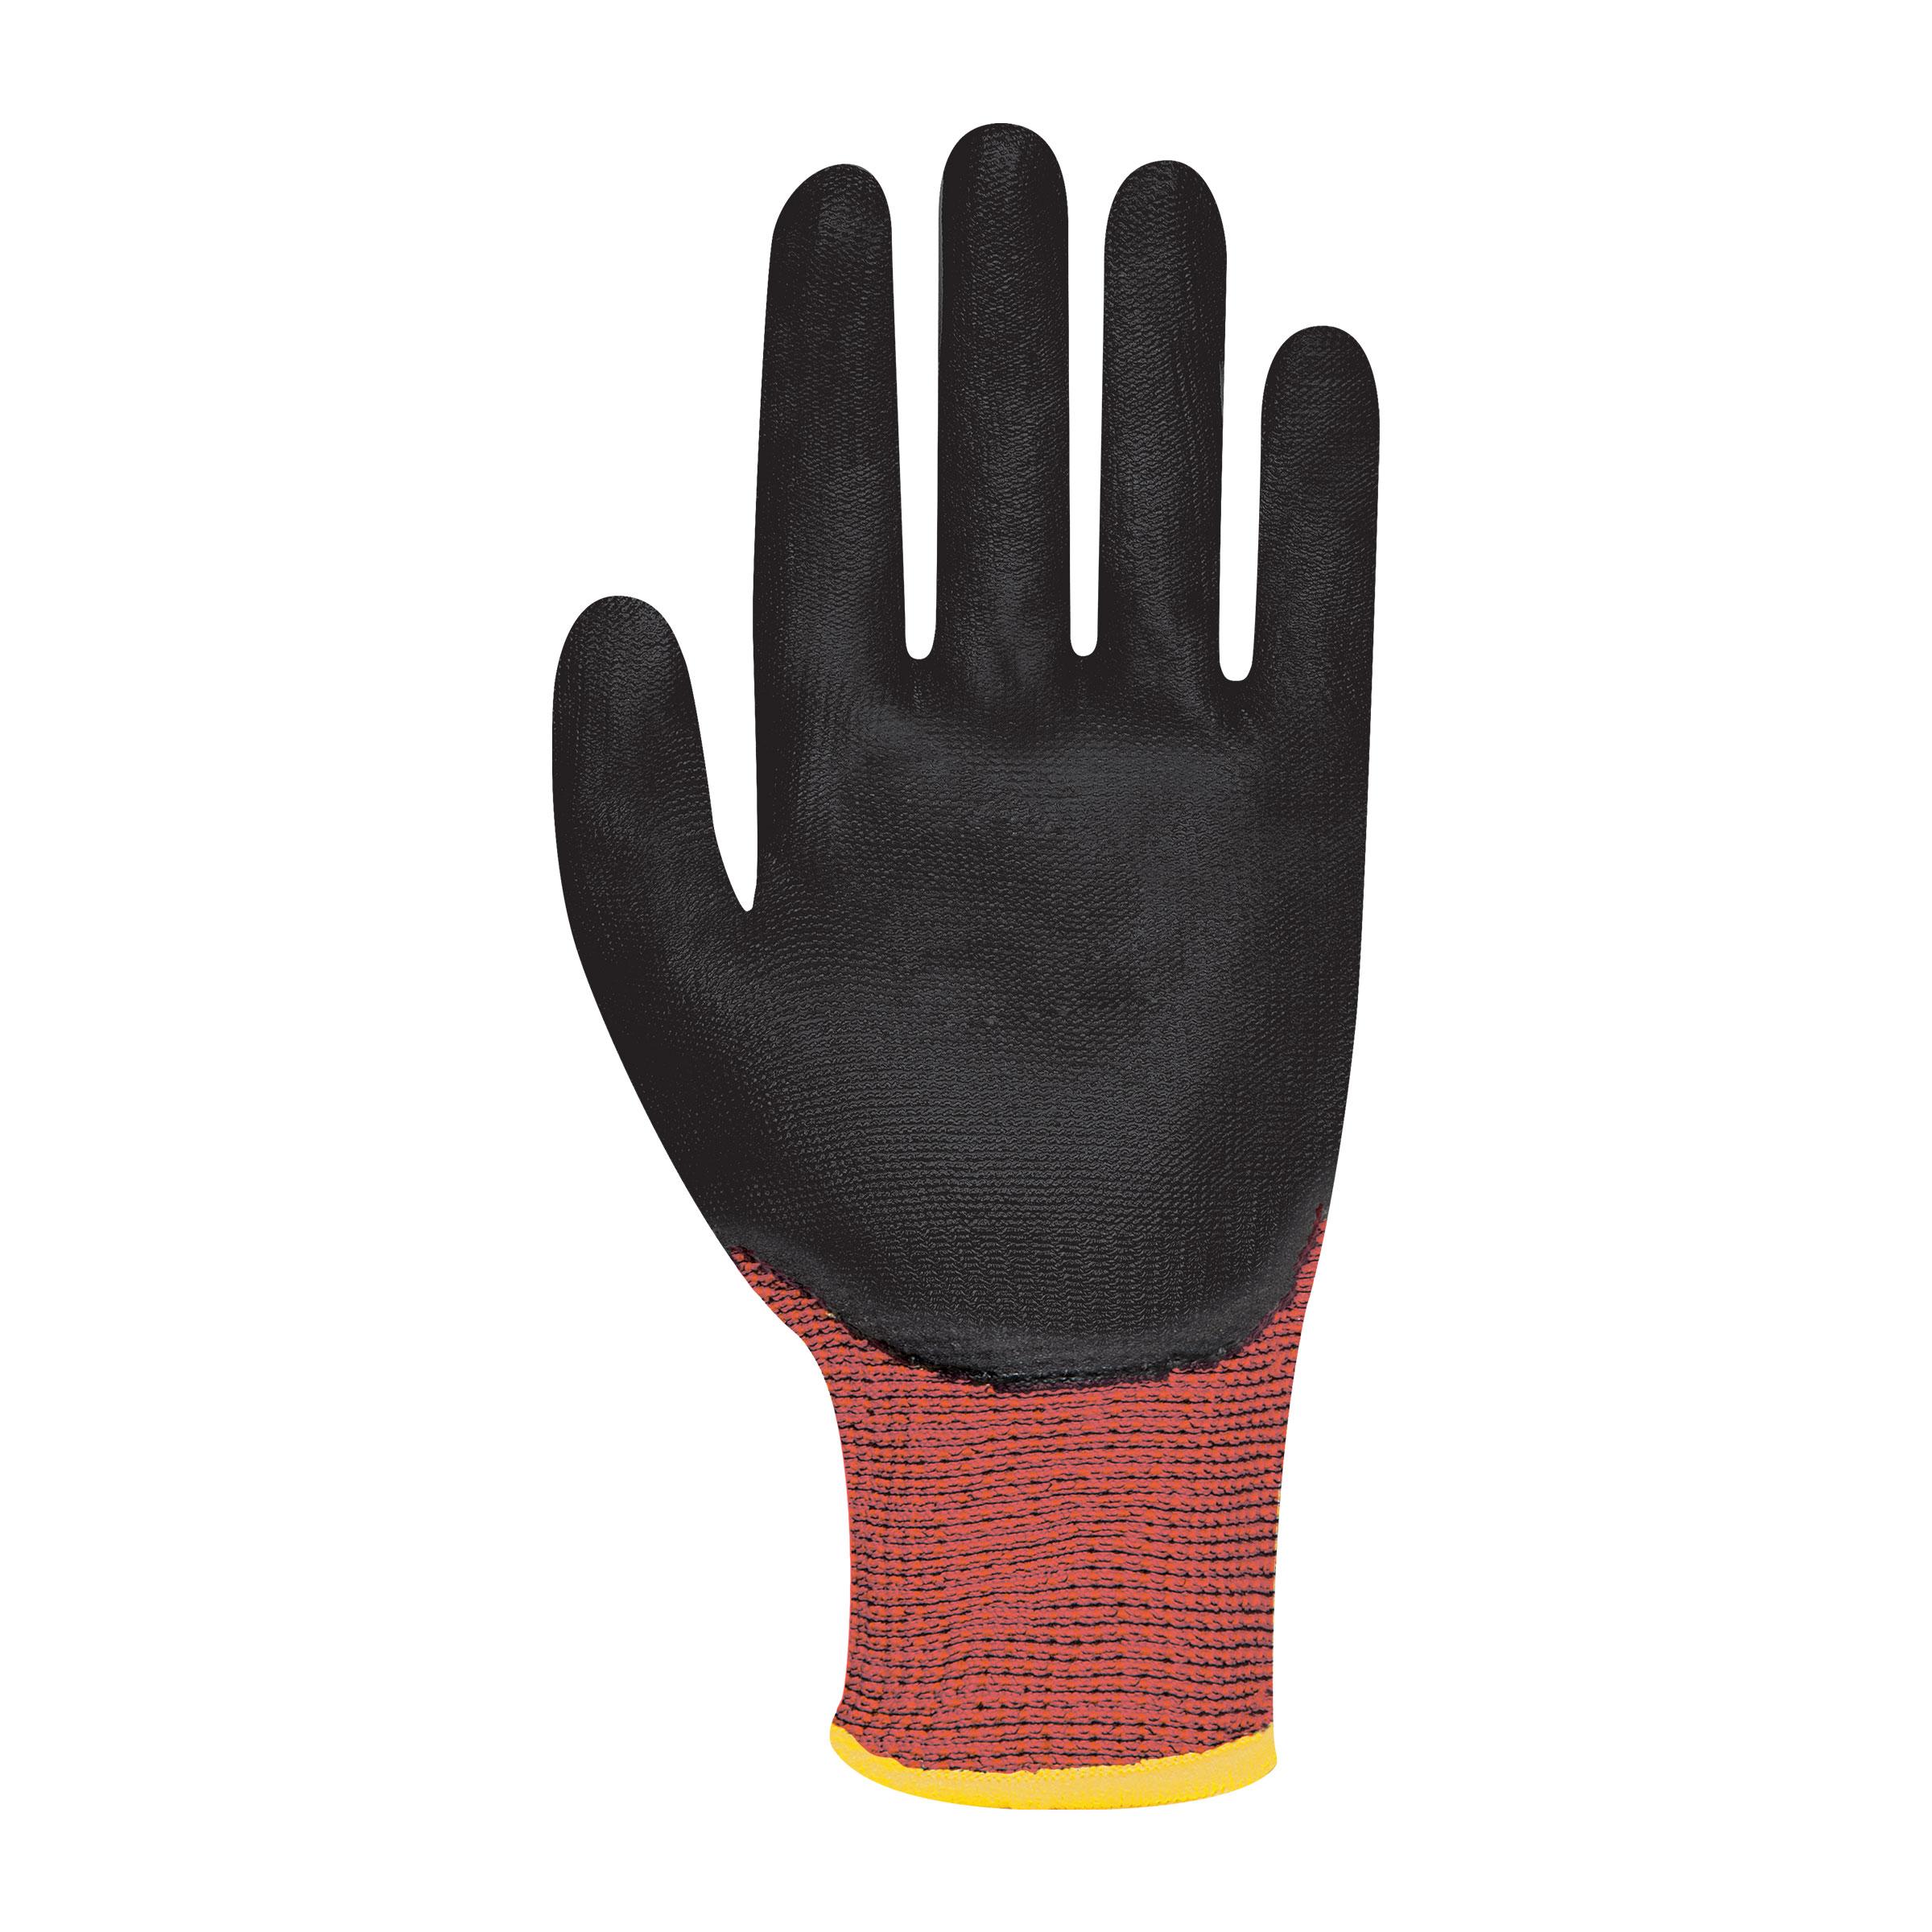 F360 GFPR450 Graphex Infinity Gloves